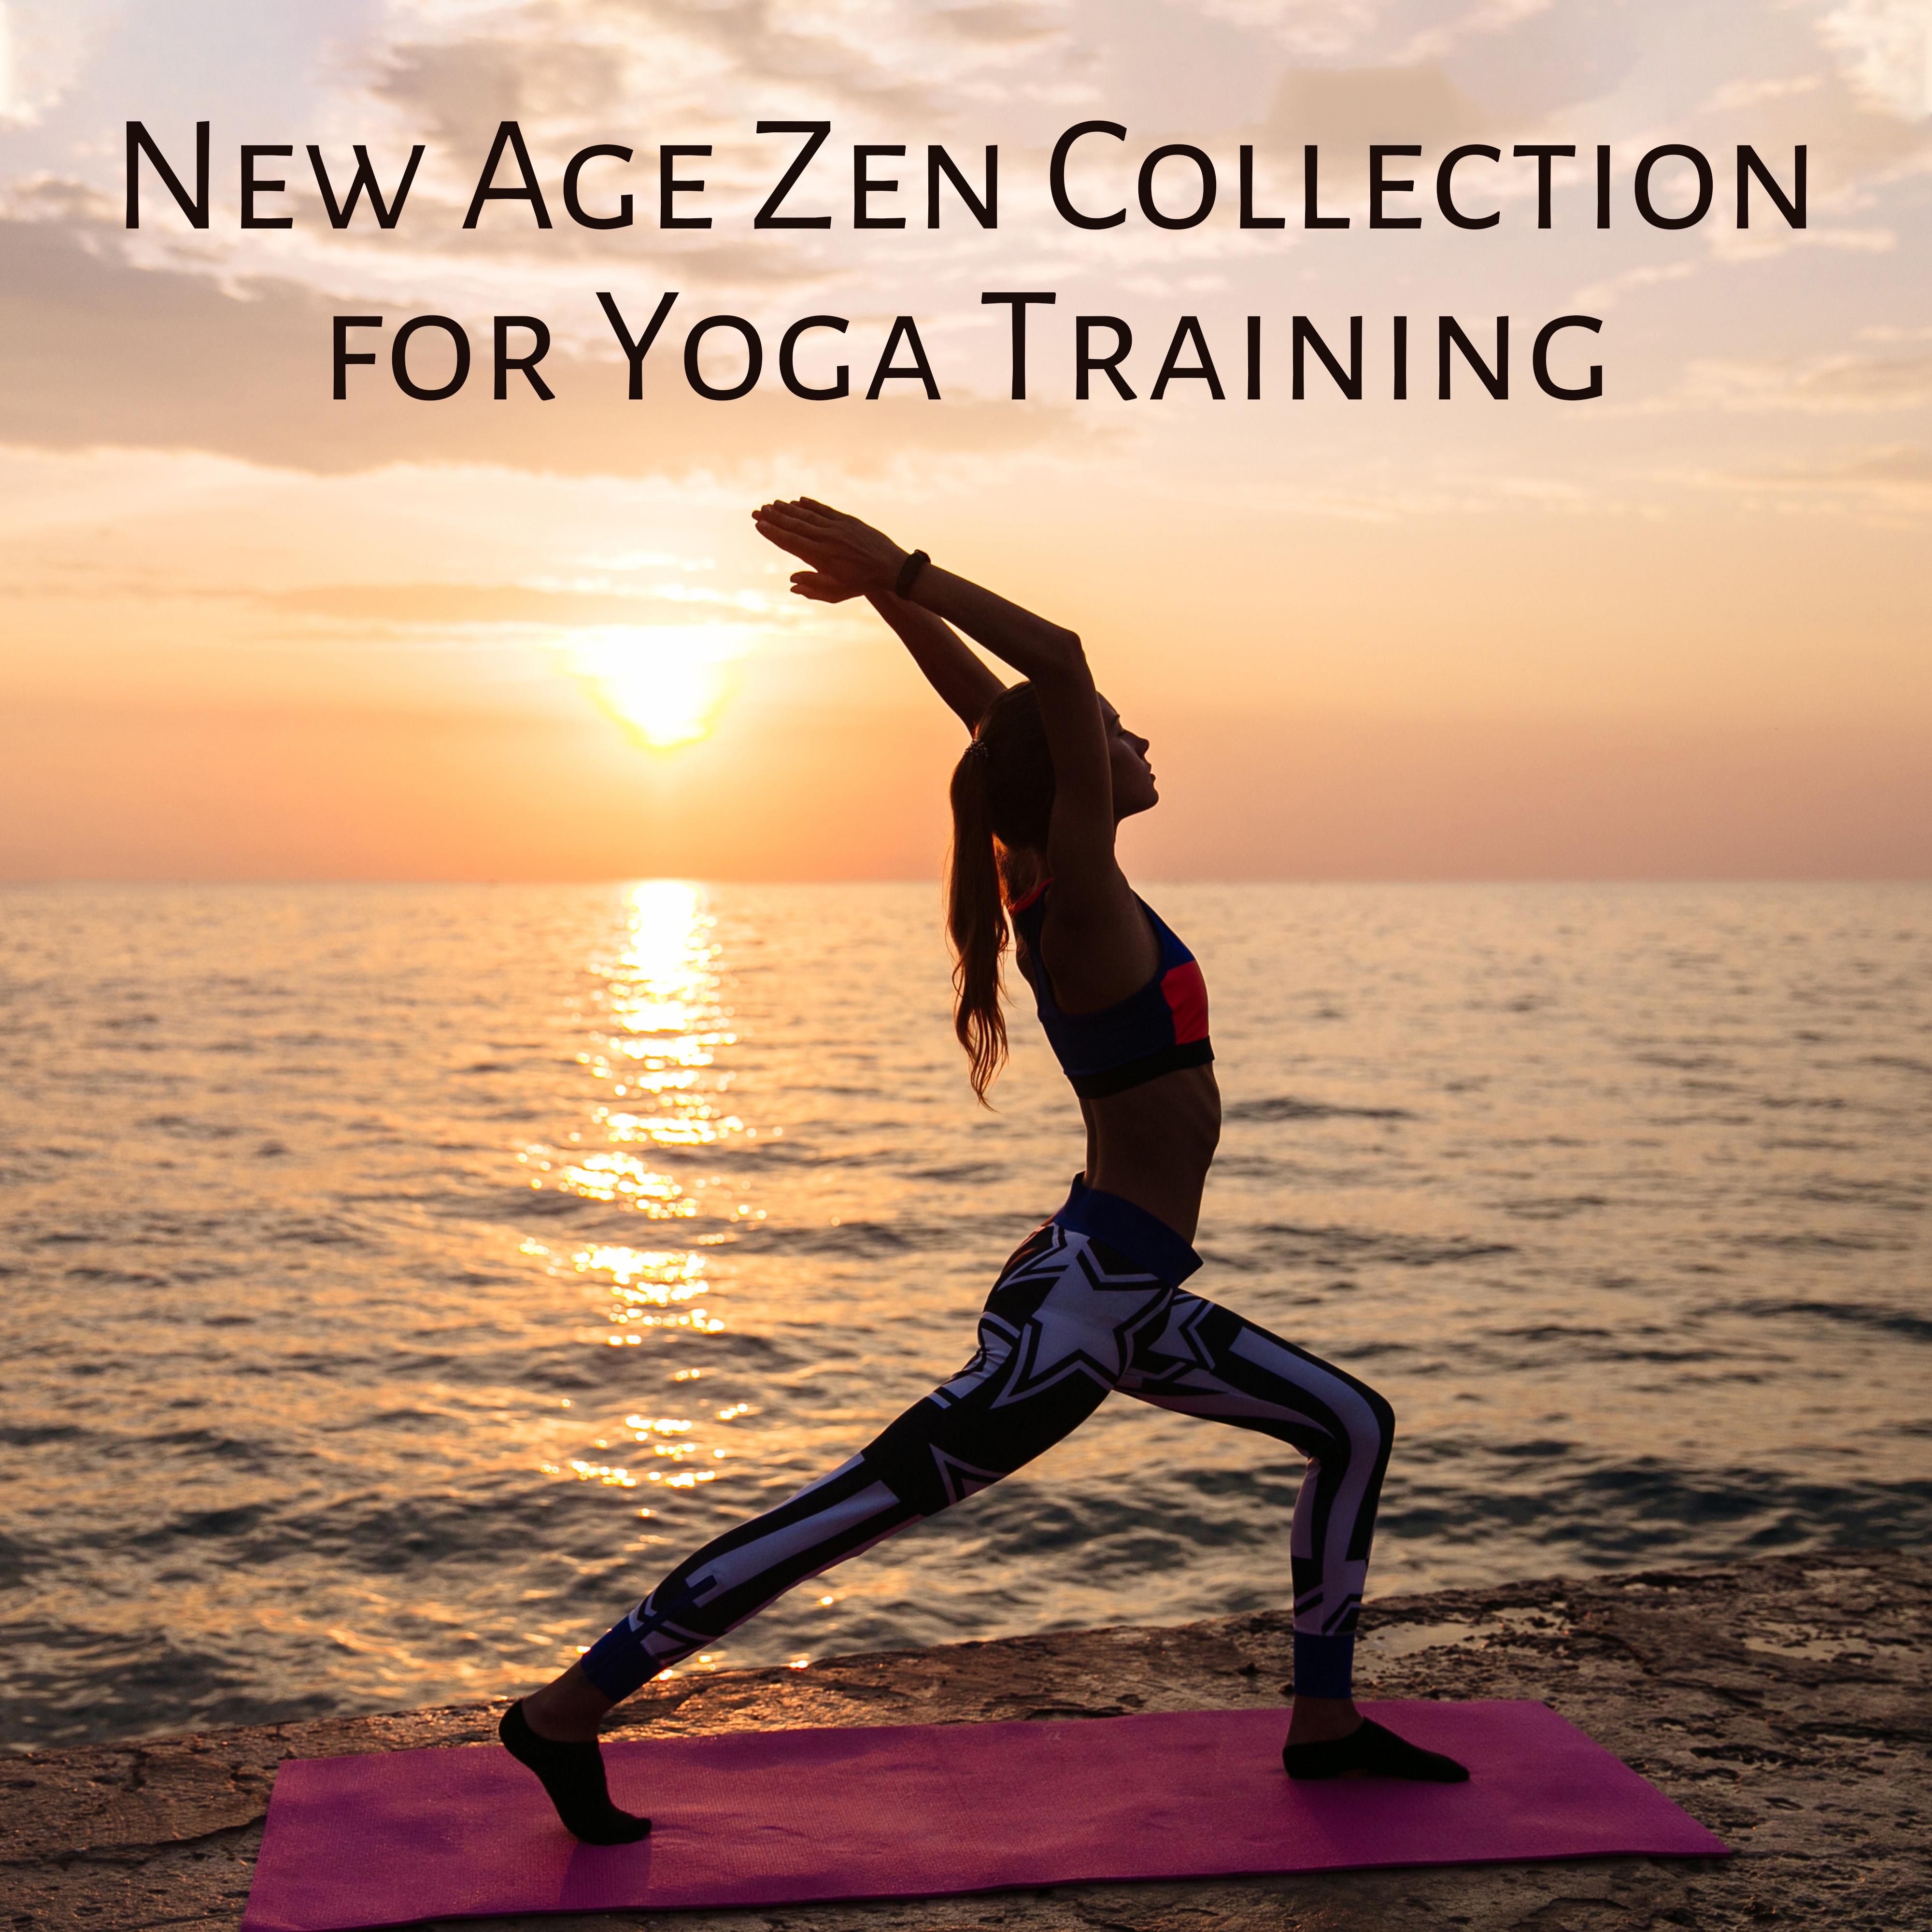 New Age Zen Collection for Yoga Training